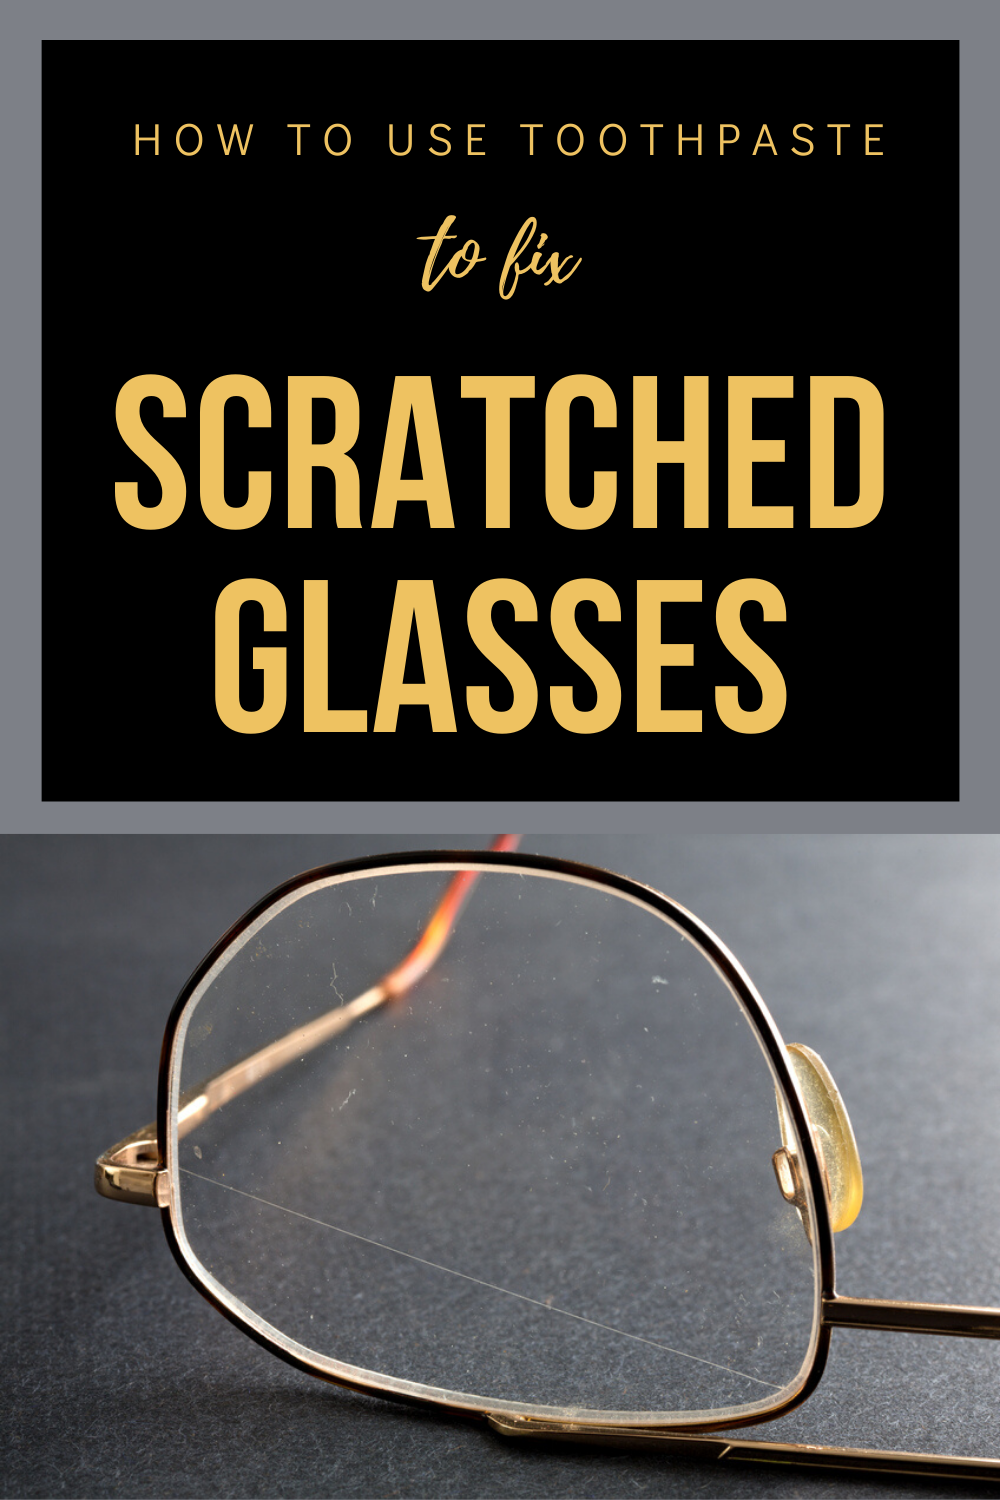 How To Use Toothpaste To Fix Scratched Glasses | xCleaning ...